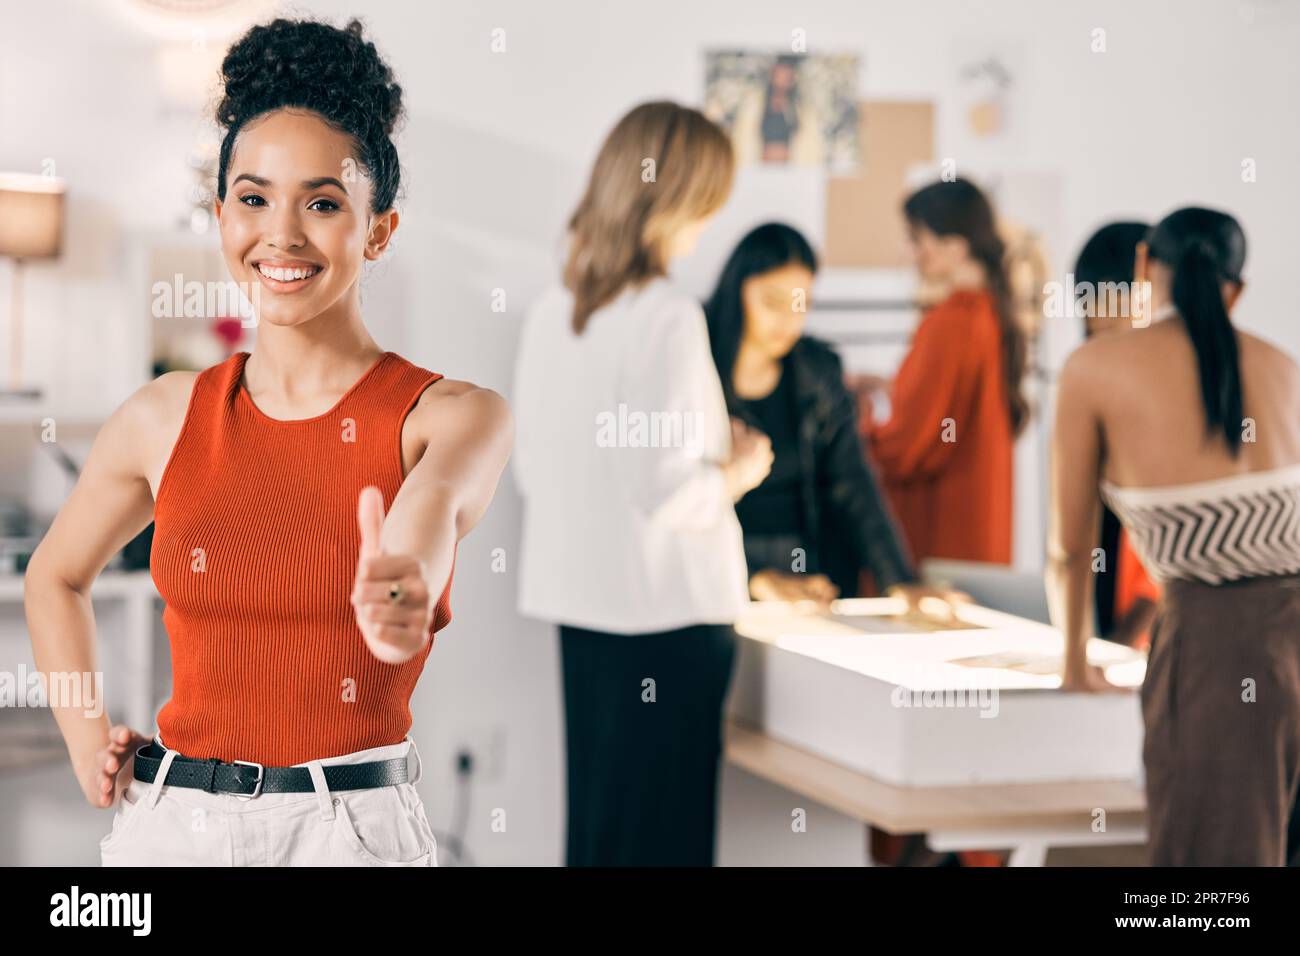 I aim to please. Shot of a young woman showing the thumbs up while her coworkers collaborate in the background. Stock Photo